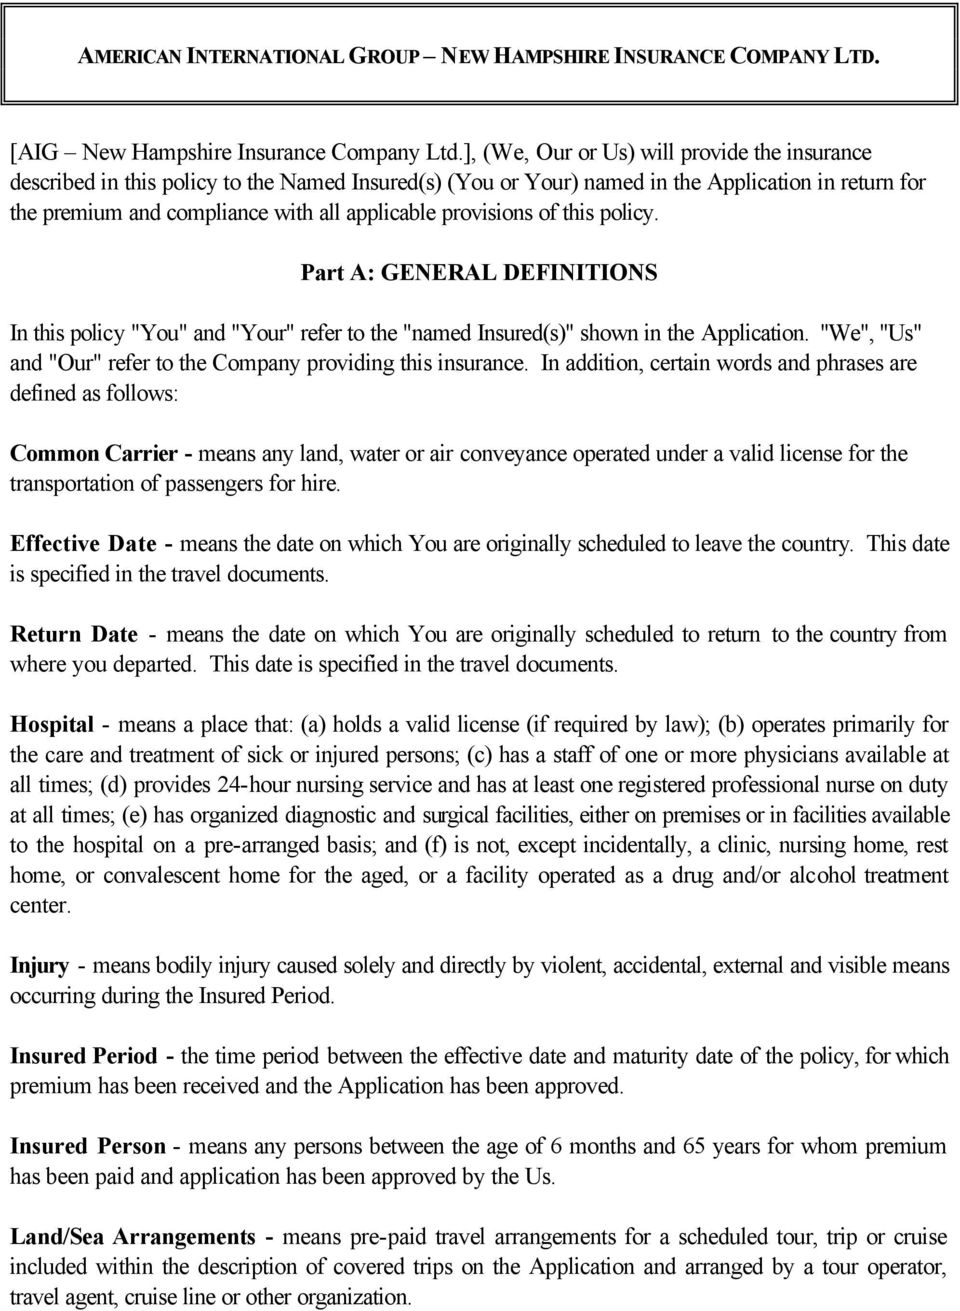 Part A General Definitions Pdf Free Download in dimensions 960 X 1311